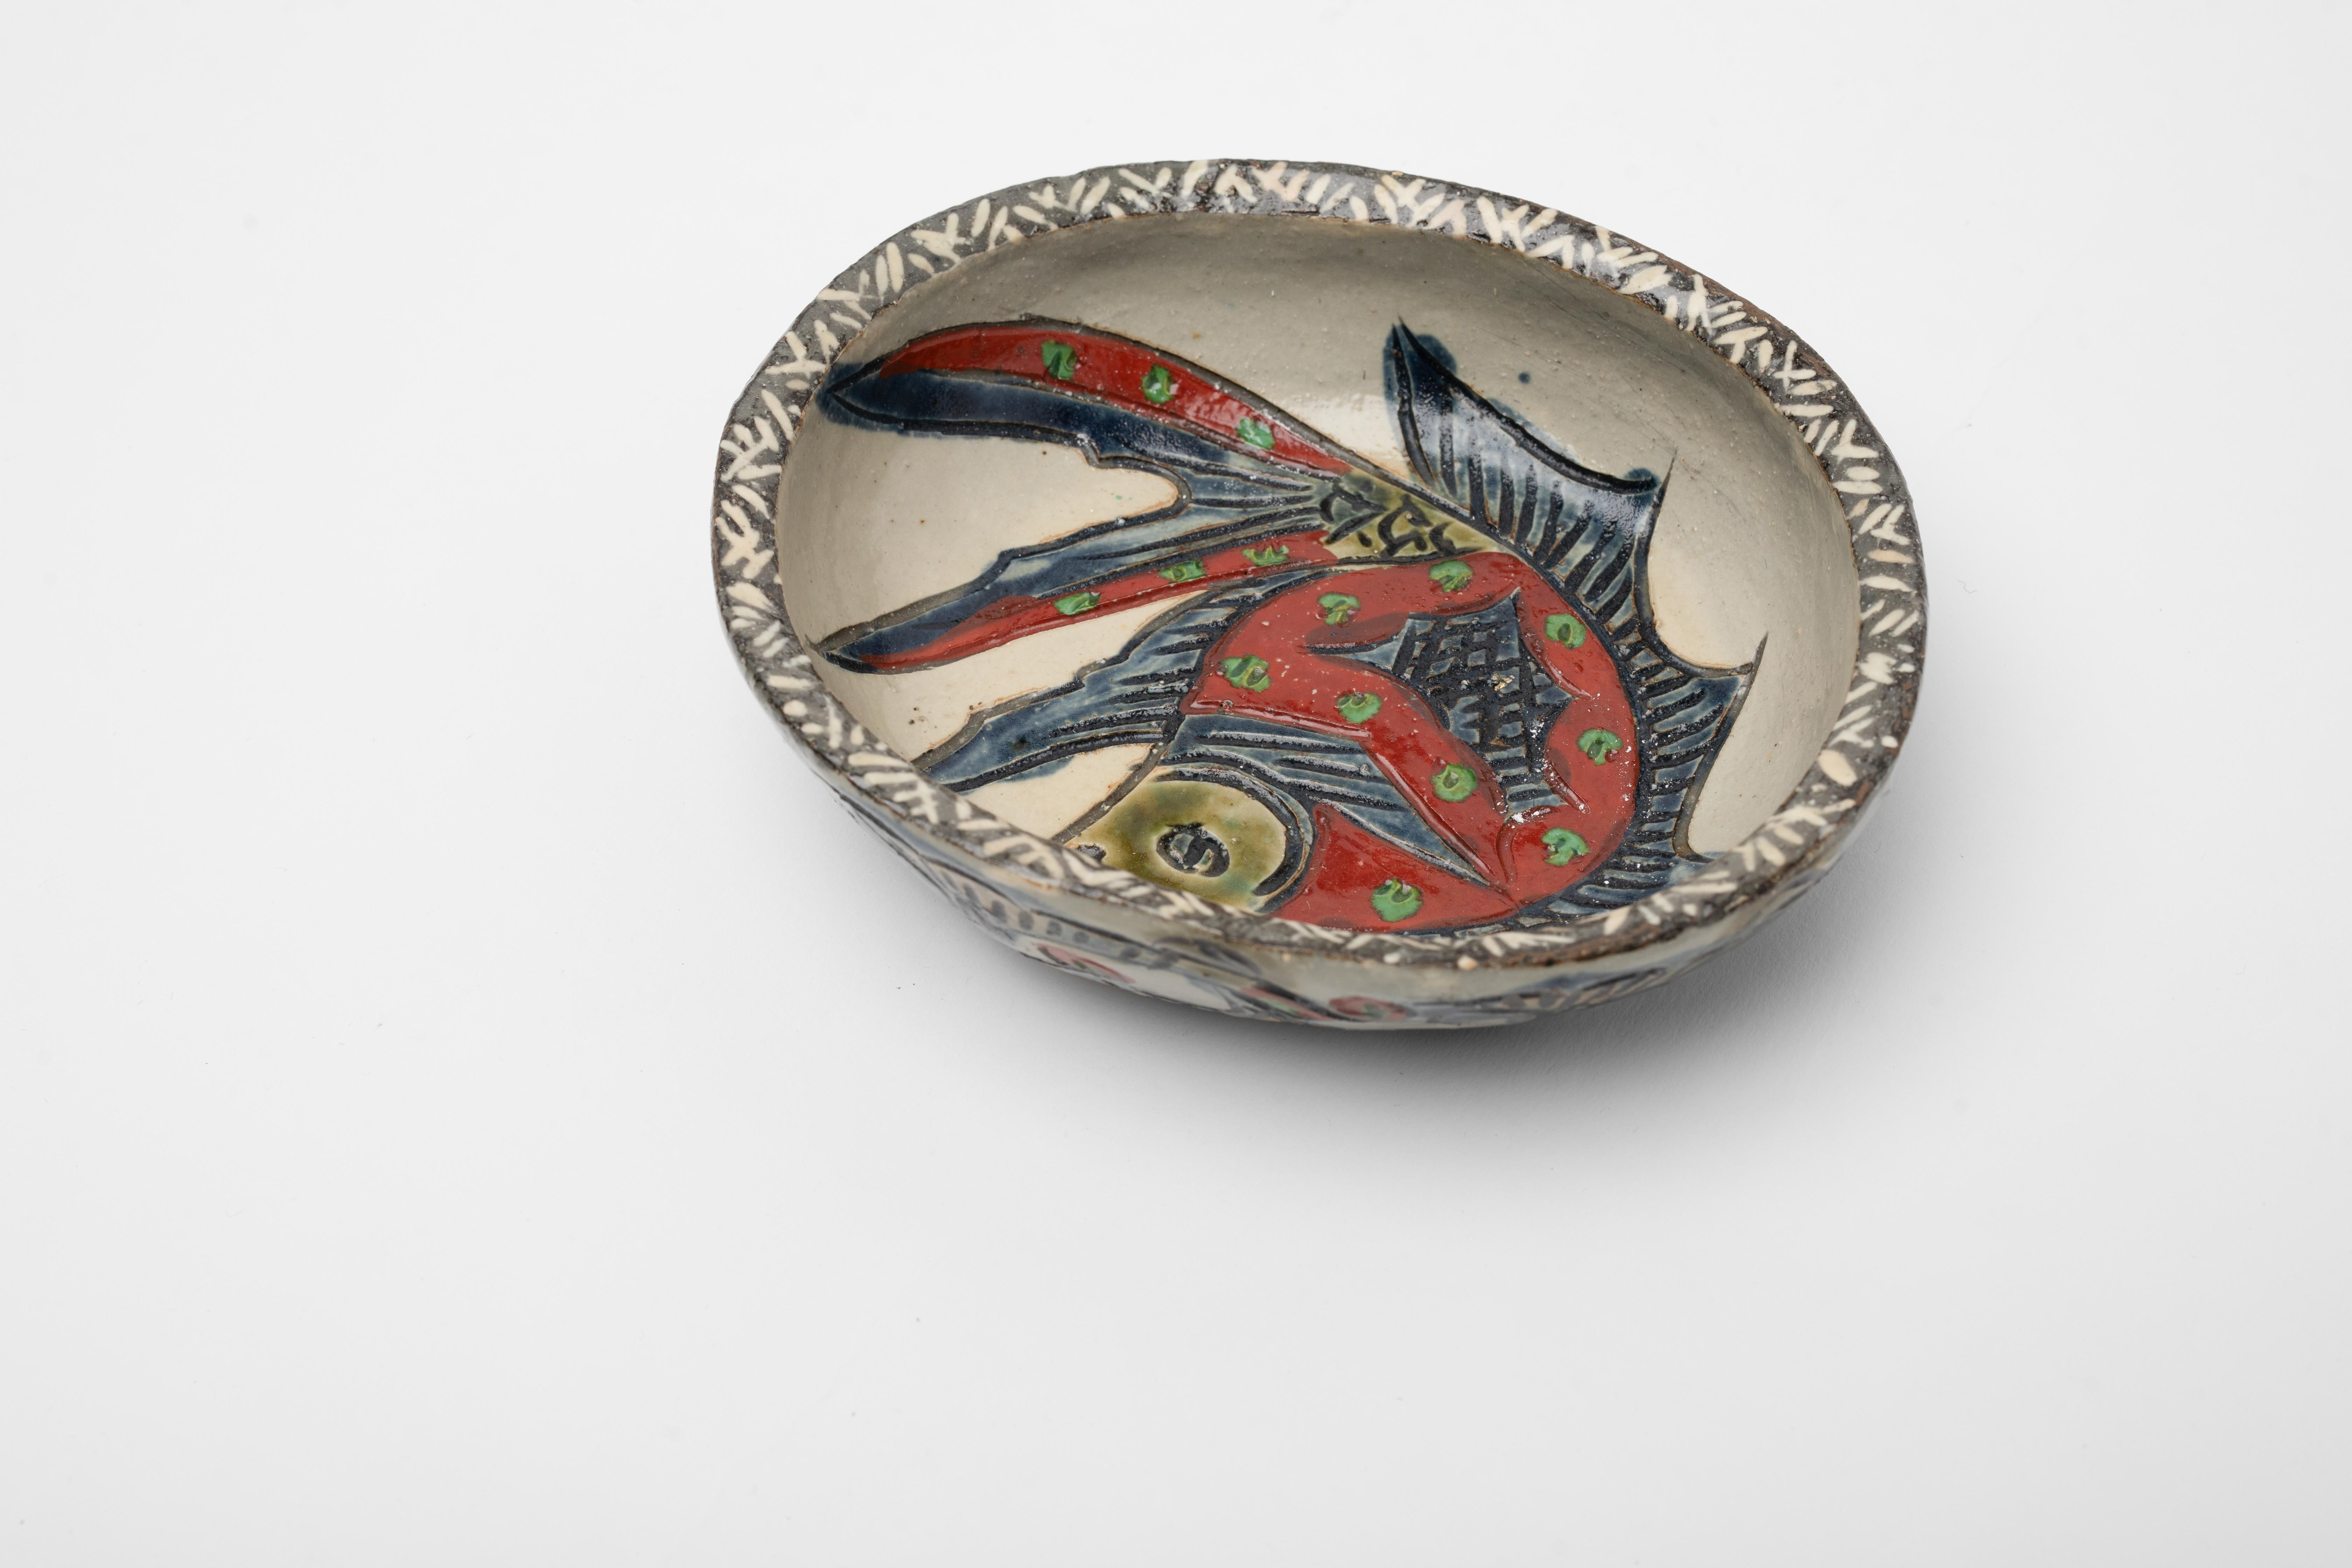 Incredible piece of Tsuboya-yaki or Tsuboya ware which comes from the Okinawa region of Japan. Most likely from the Taisho period (1912-1926) when there was a resurgence of popularity of Tsuboya-yaki folk craft ware.

The icon of the angel fish is